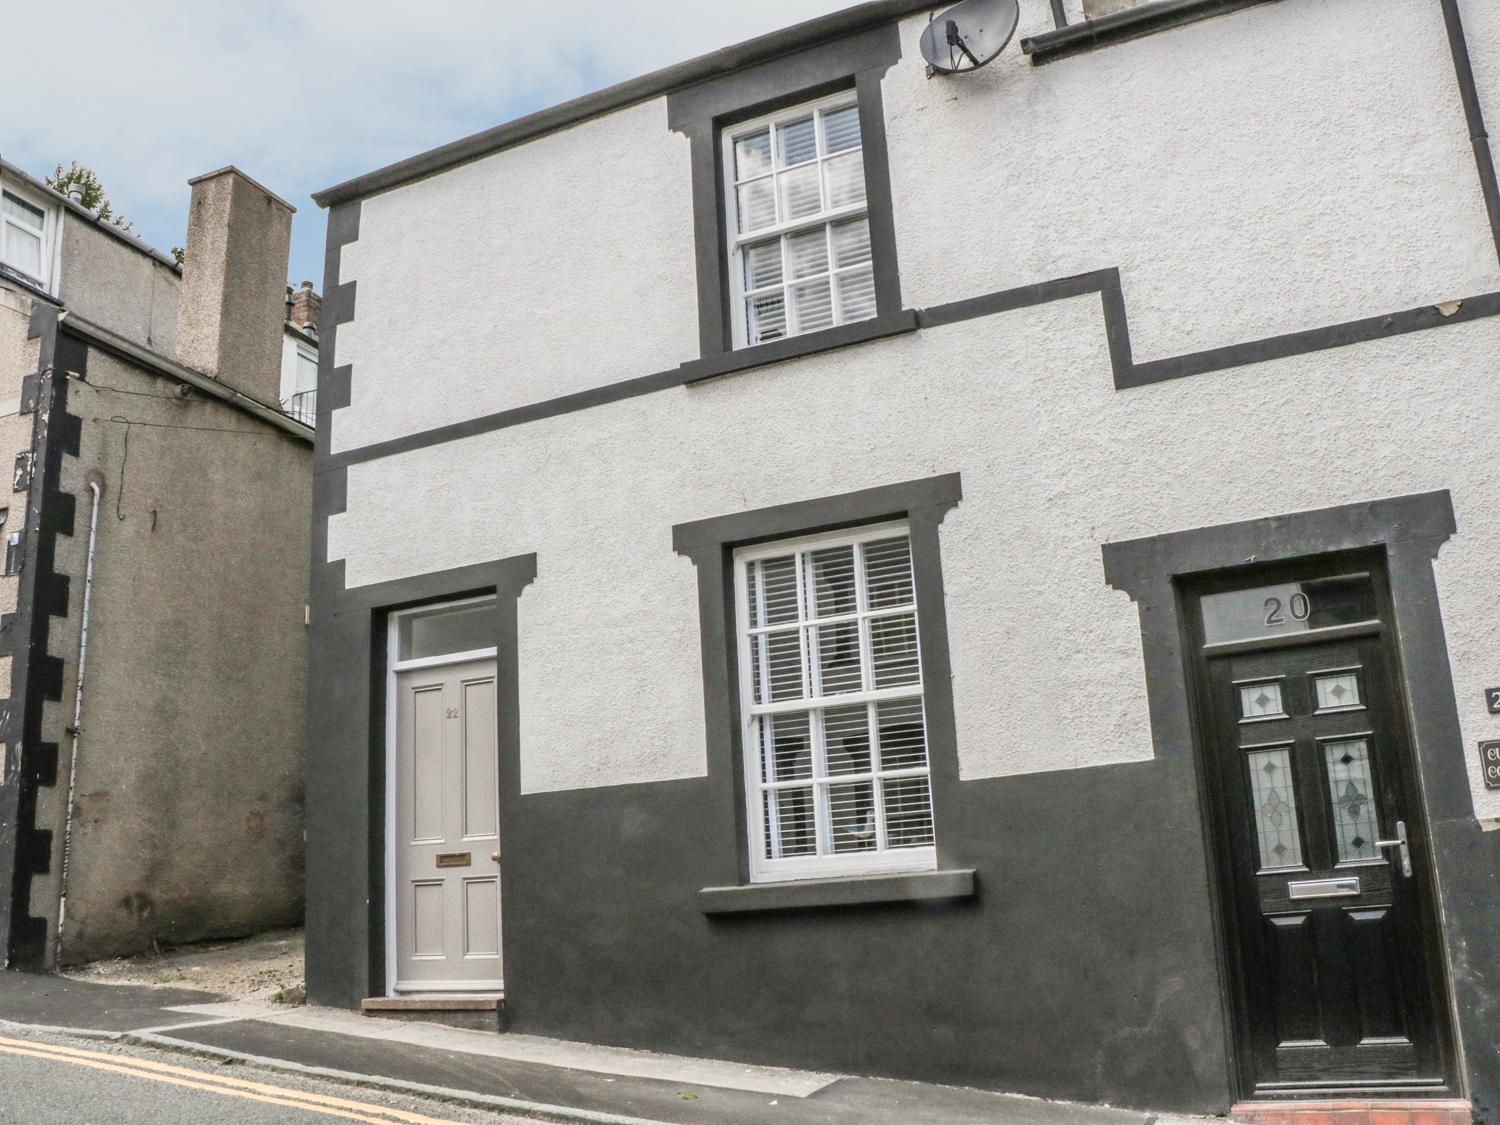 Holiday Cottage Reviews for 22 Uppergate Street - Self Catering Property in llandudno, Conwy